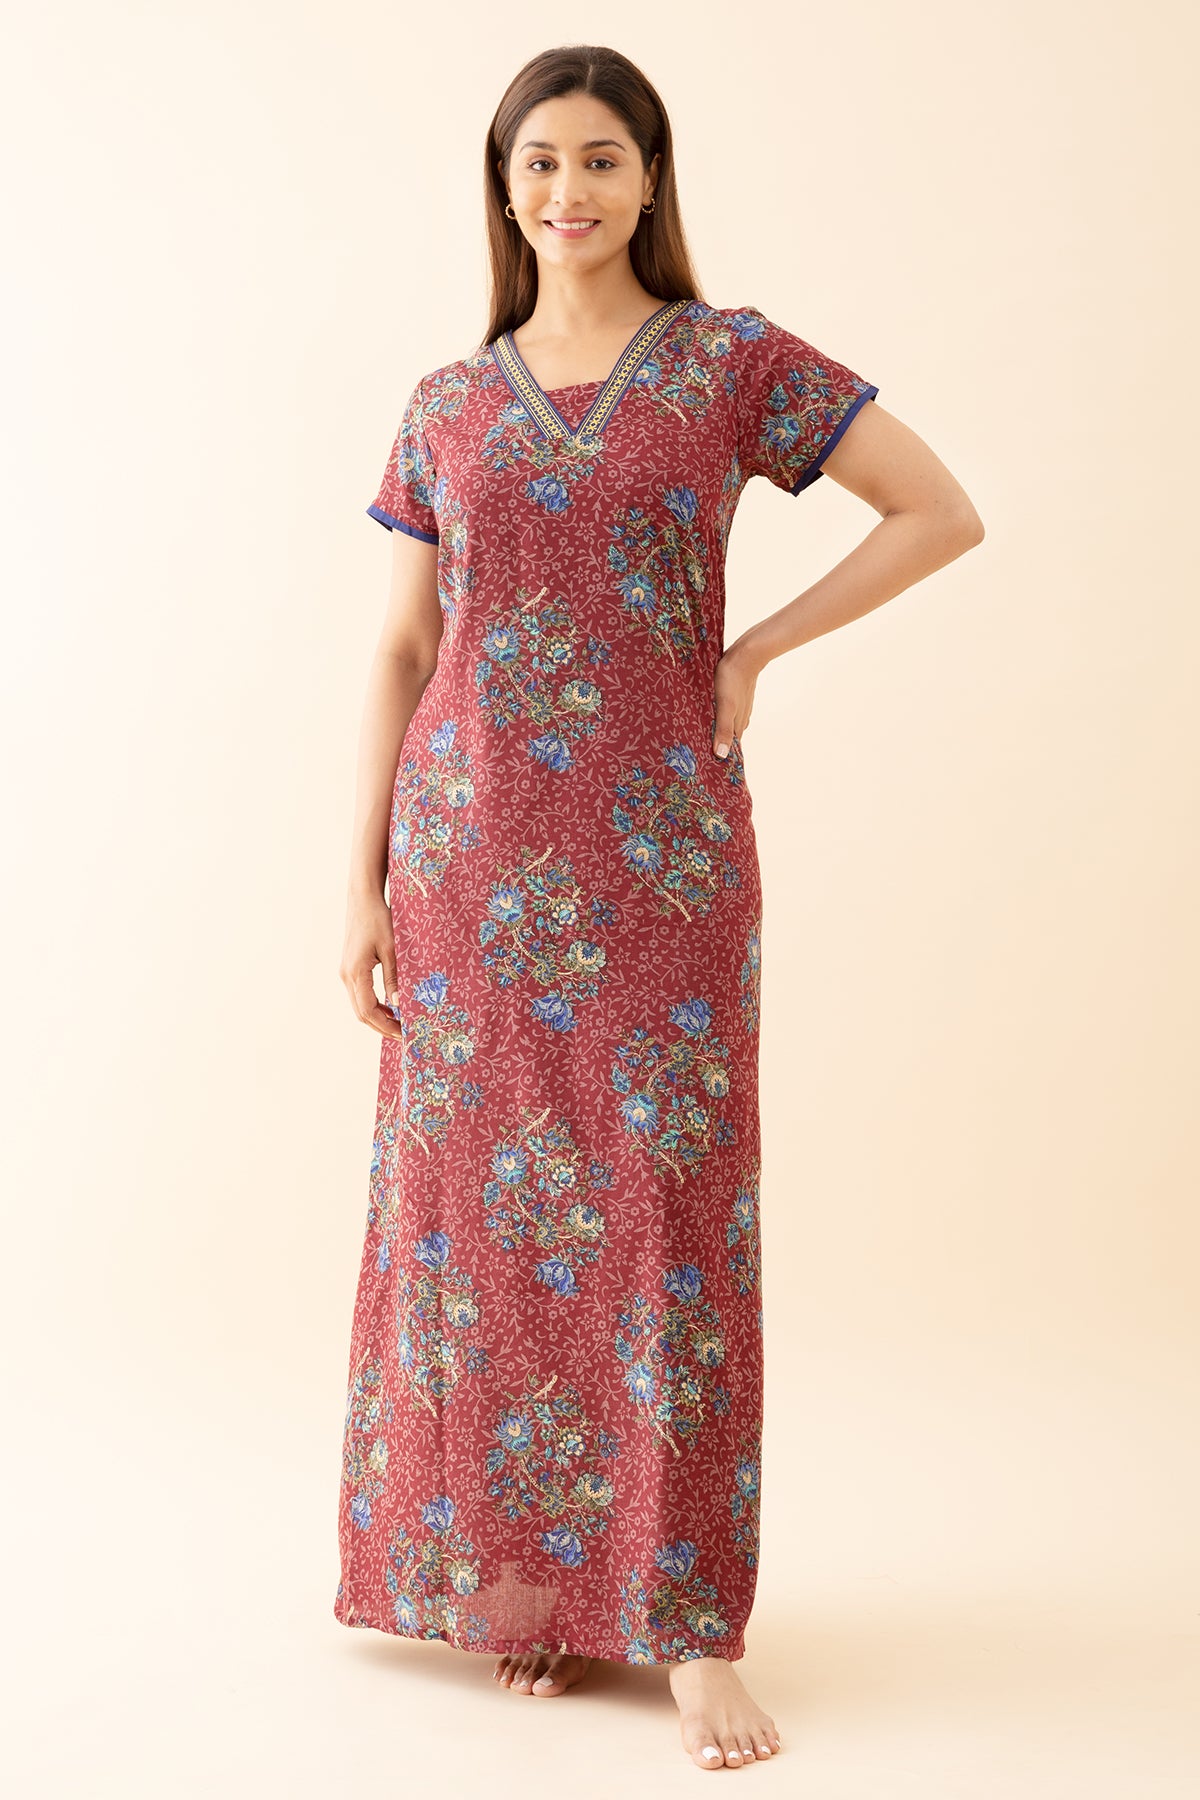 Baroque Floral Printed Nighty with Contrast Embroidered Neckline - Maroon